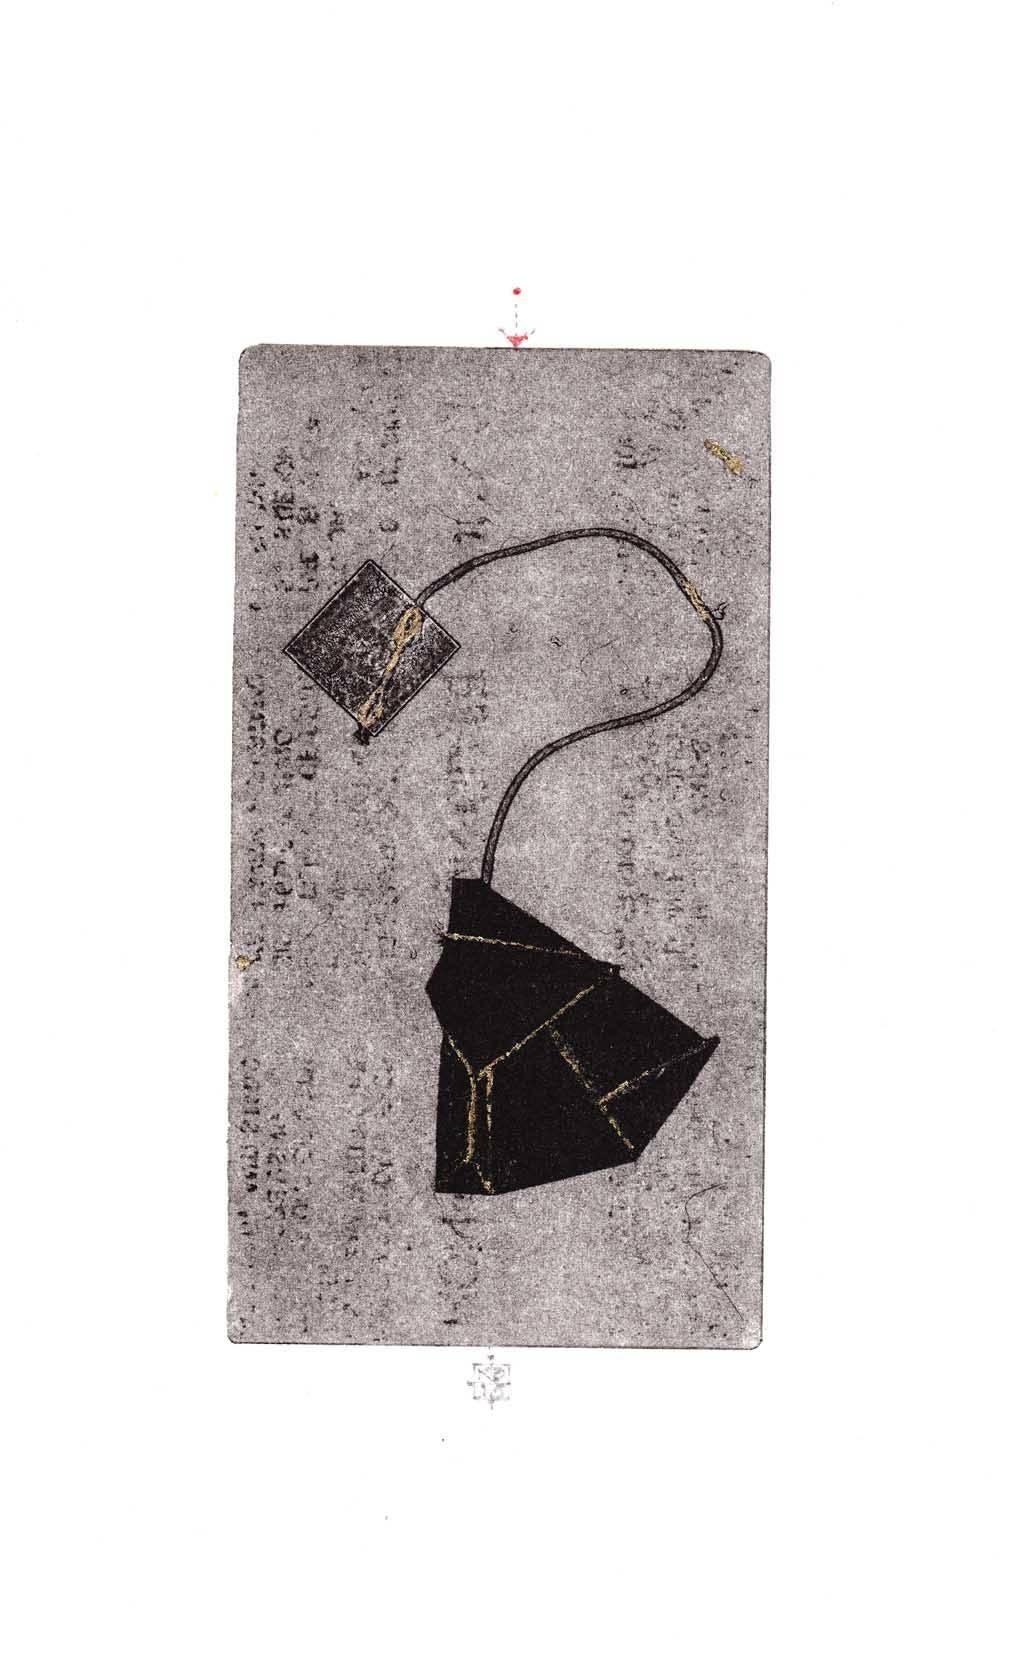 BlackTea, mixed media monotype with gold leaf, black and white print of teabag - Mixed Media Art by Karin Bruckner